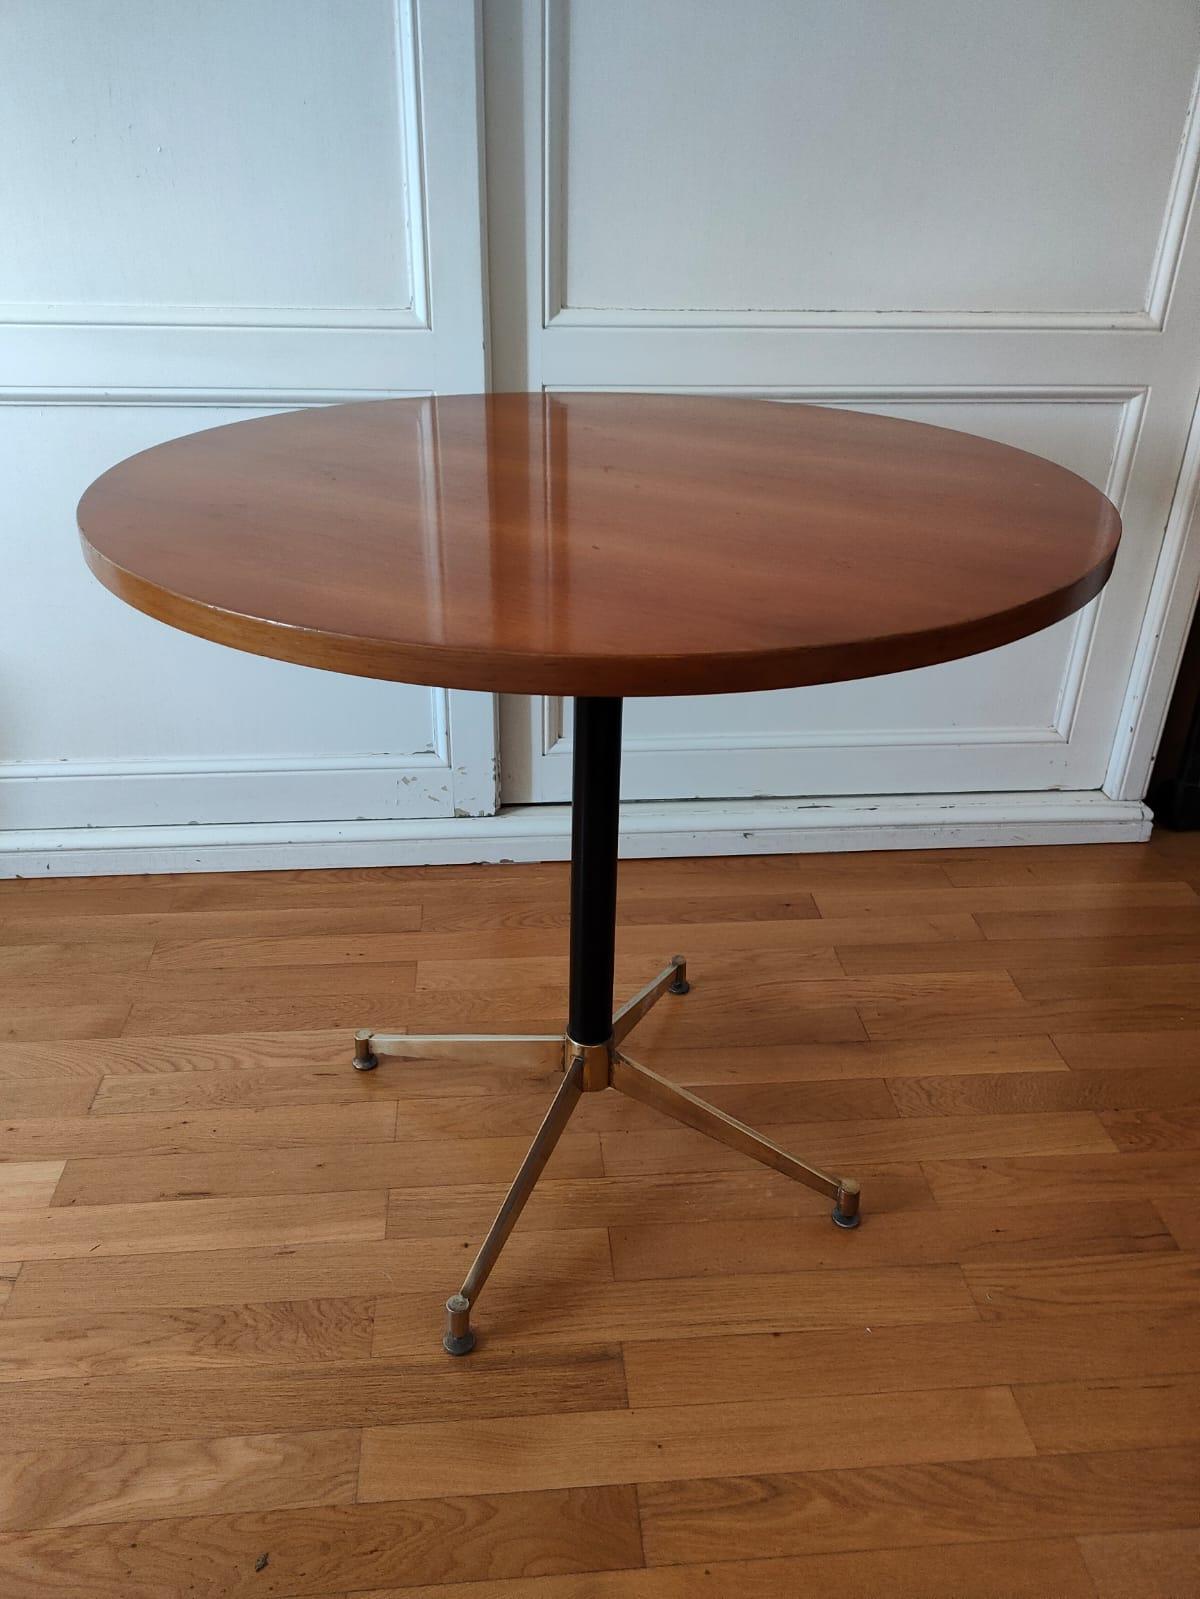 Mid-Century Modern Gio Ponti Style Round Table 1955s Legs in Brass and Painted Metal For Sale